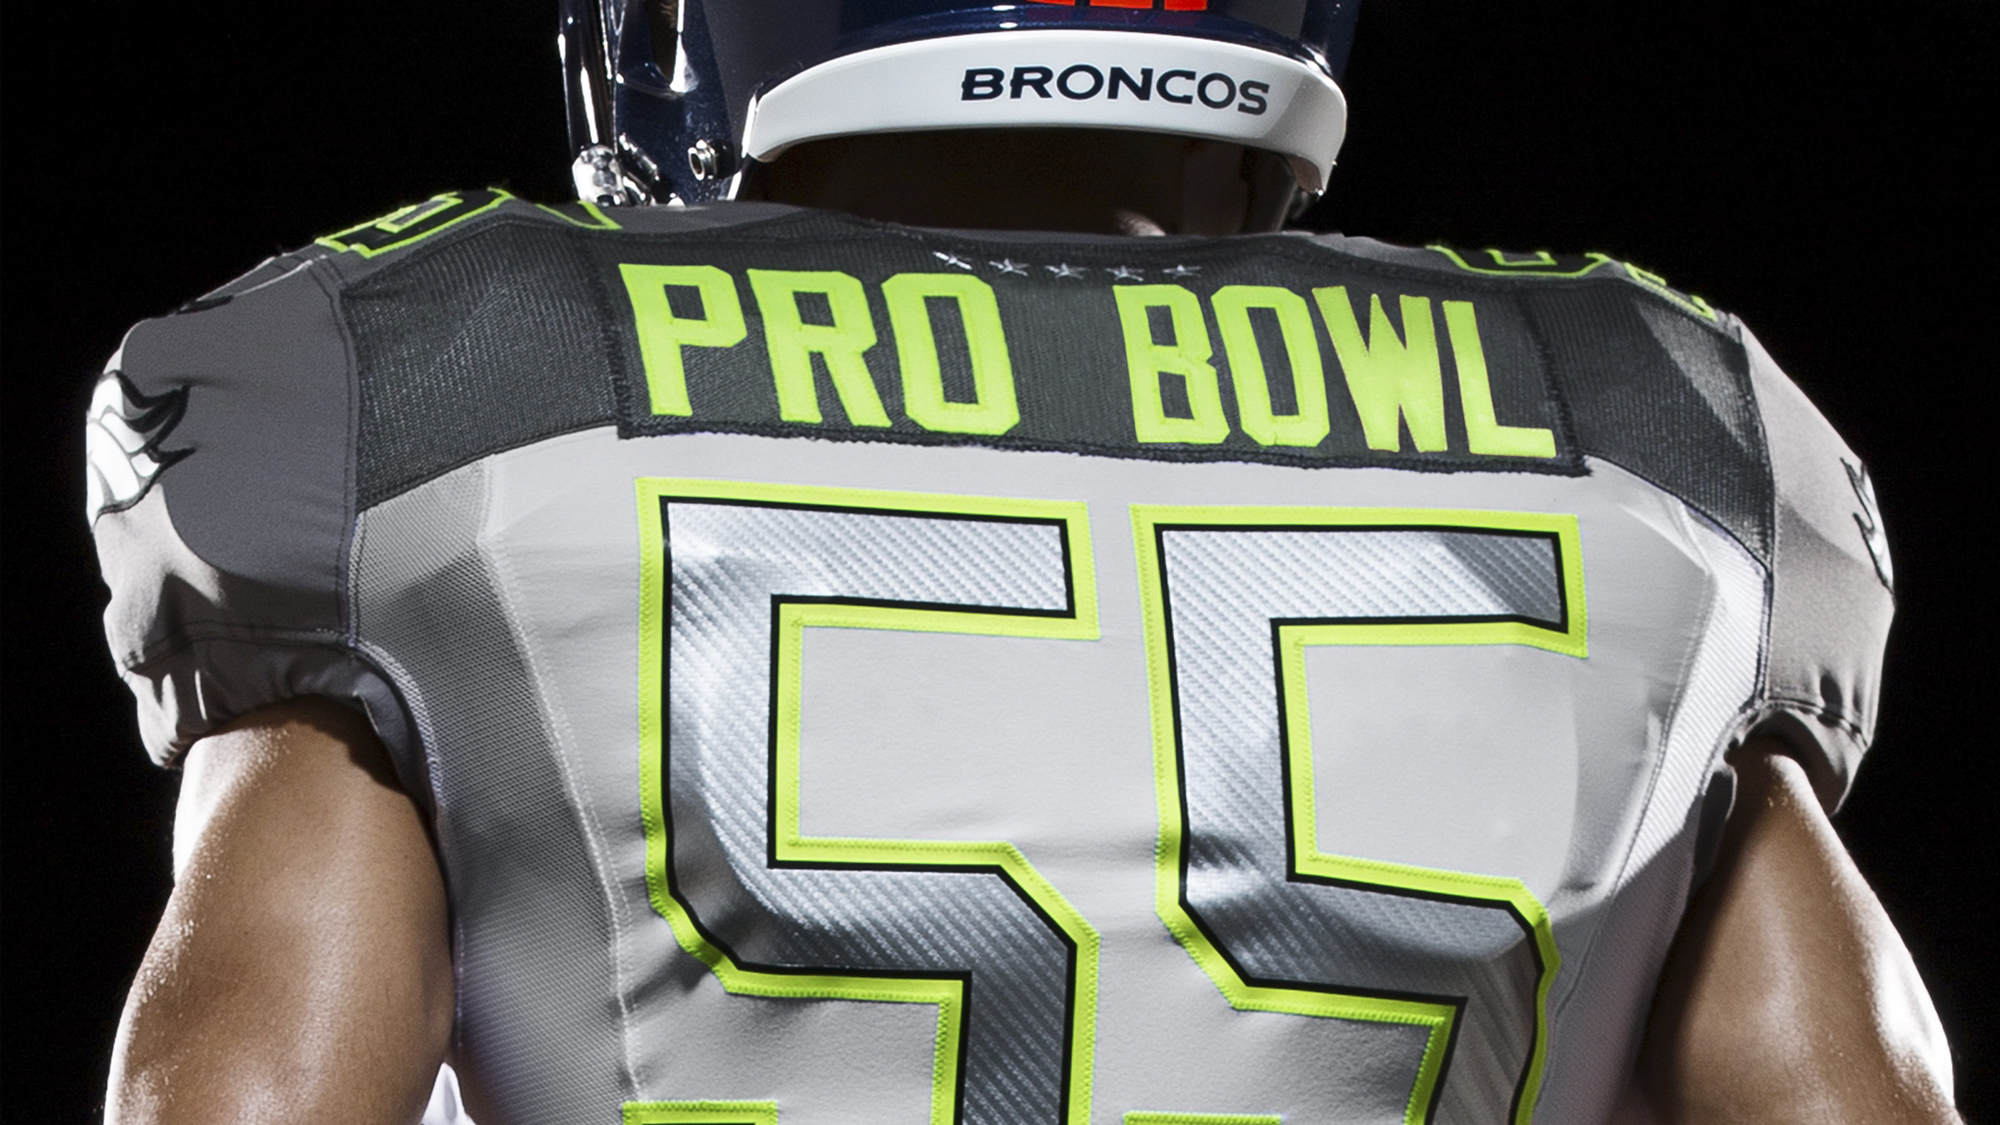 These are the uniforms players will wear in the Pro Bowl For The Win